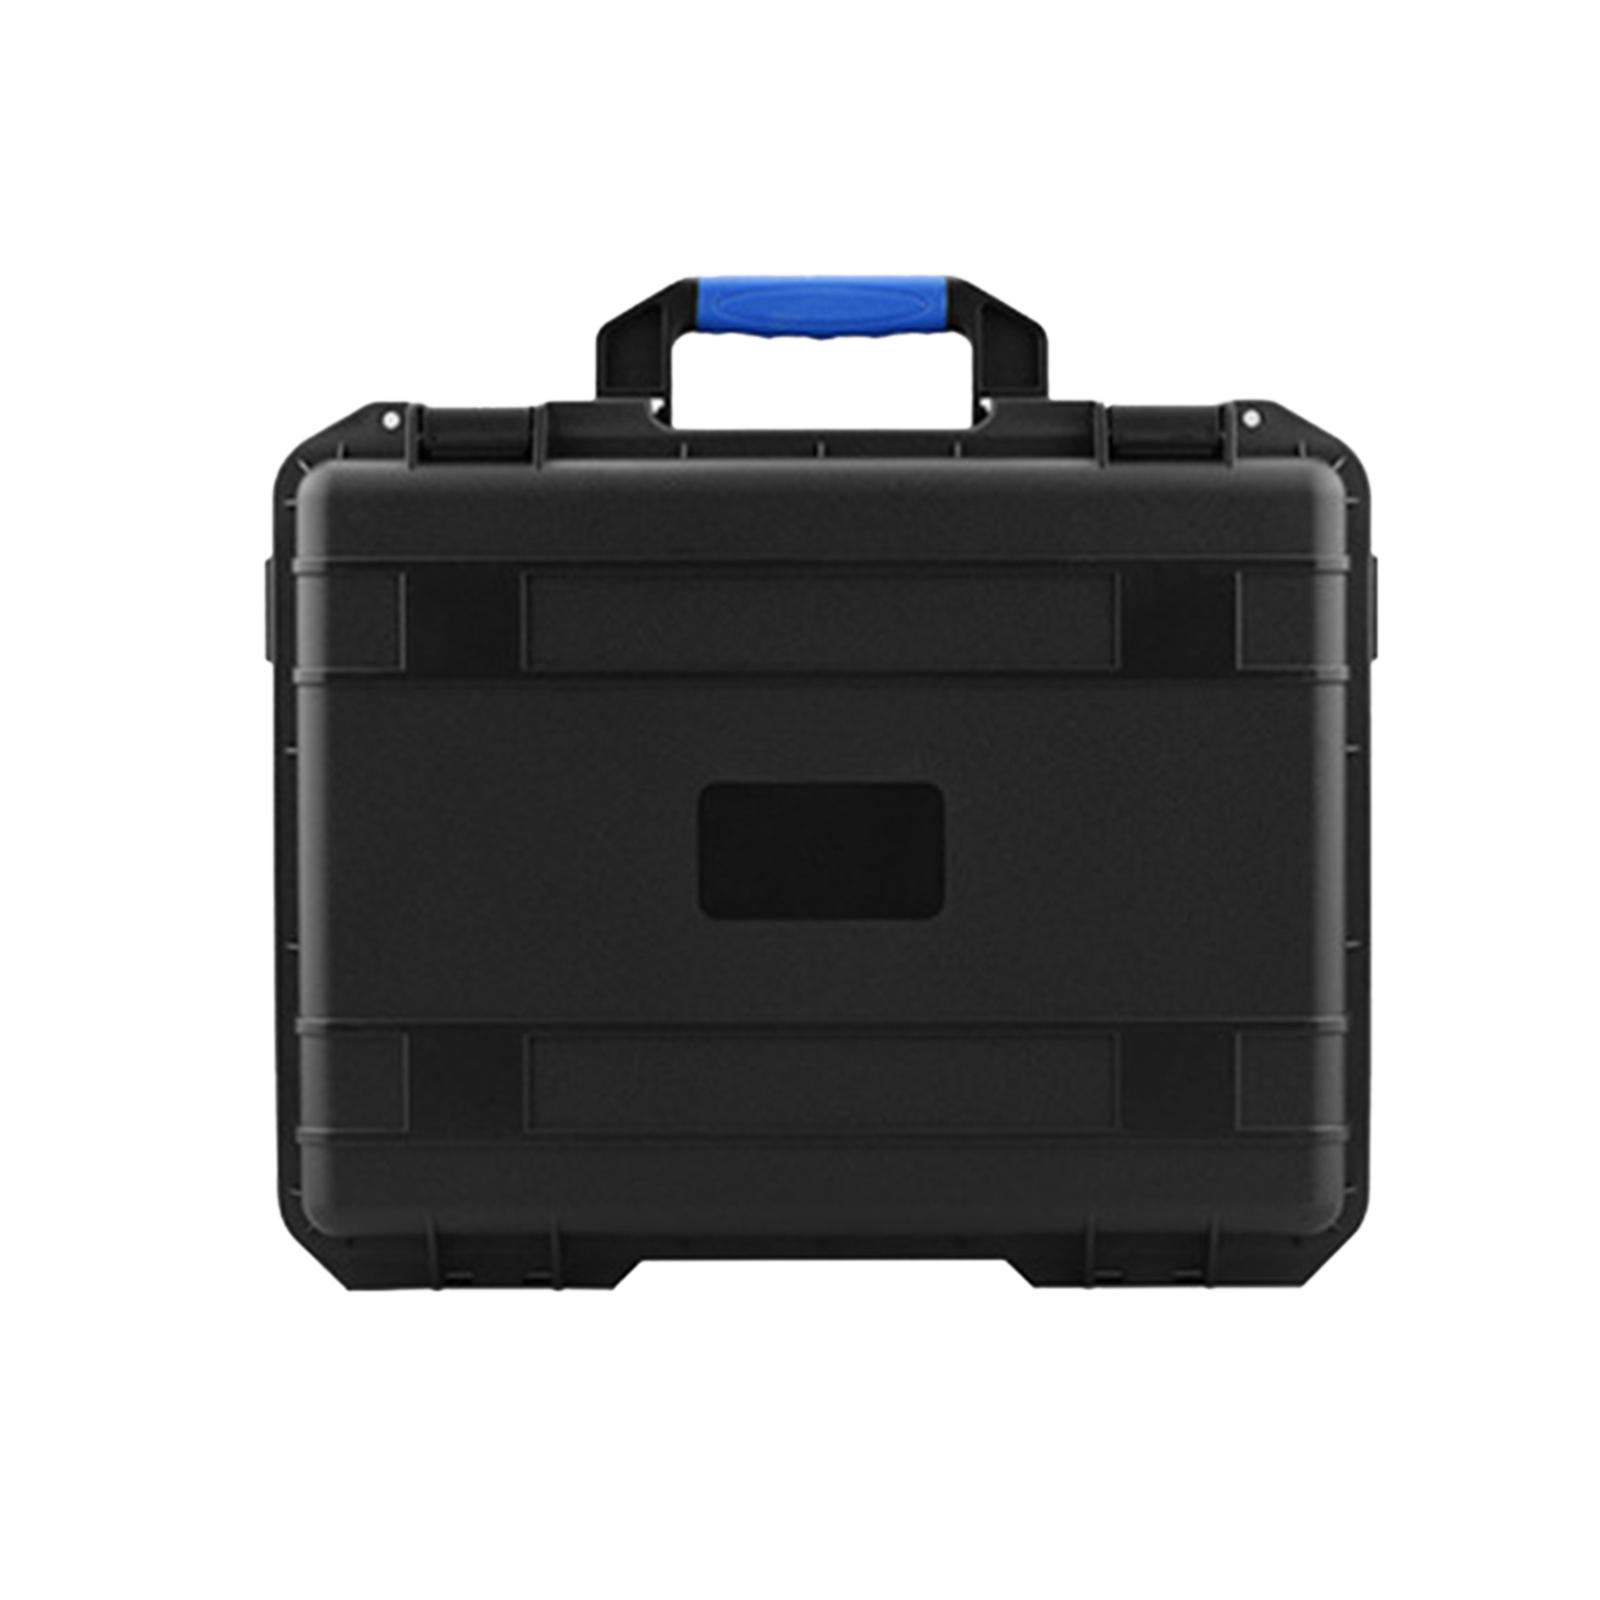 Waterproof Drone Carrying Case for Remote Control Quadcopter